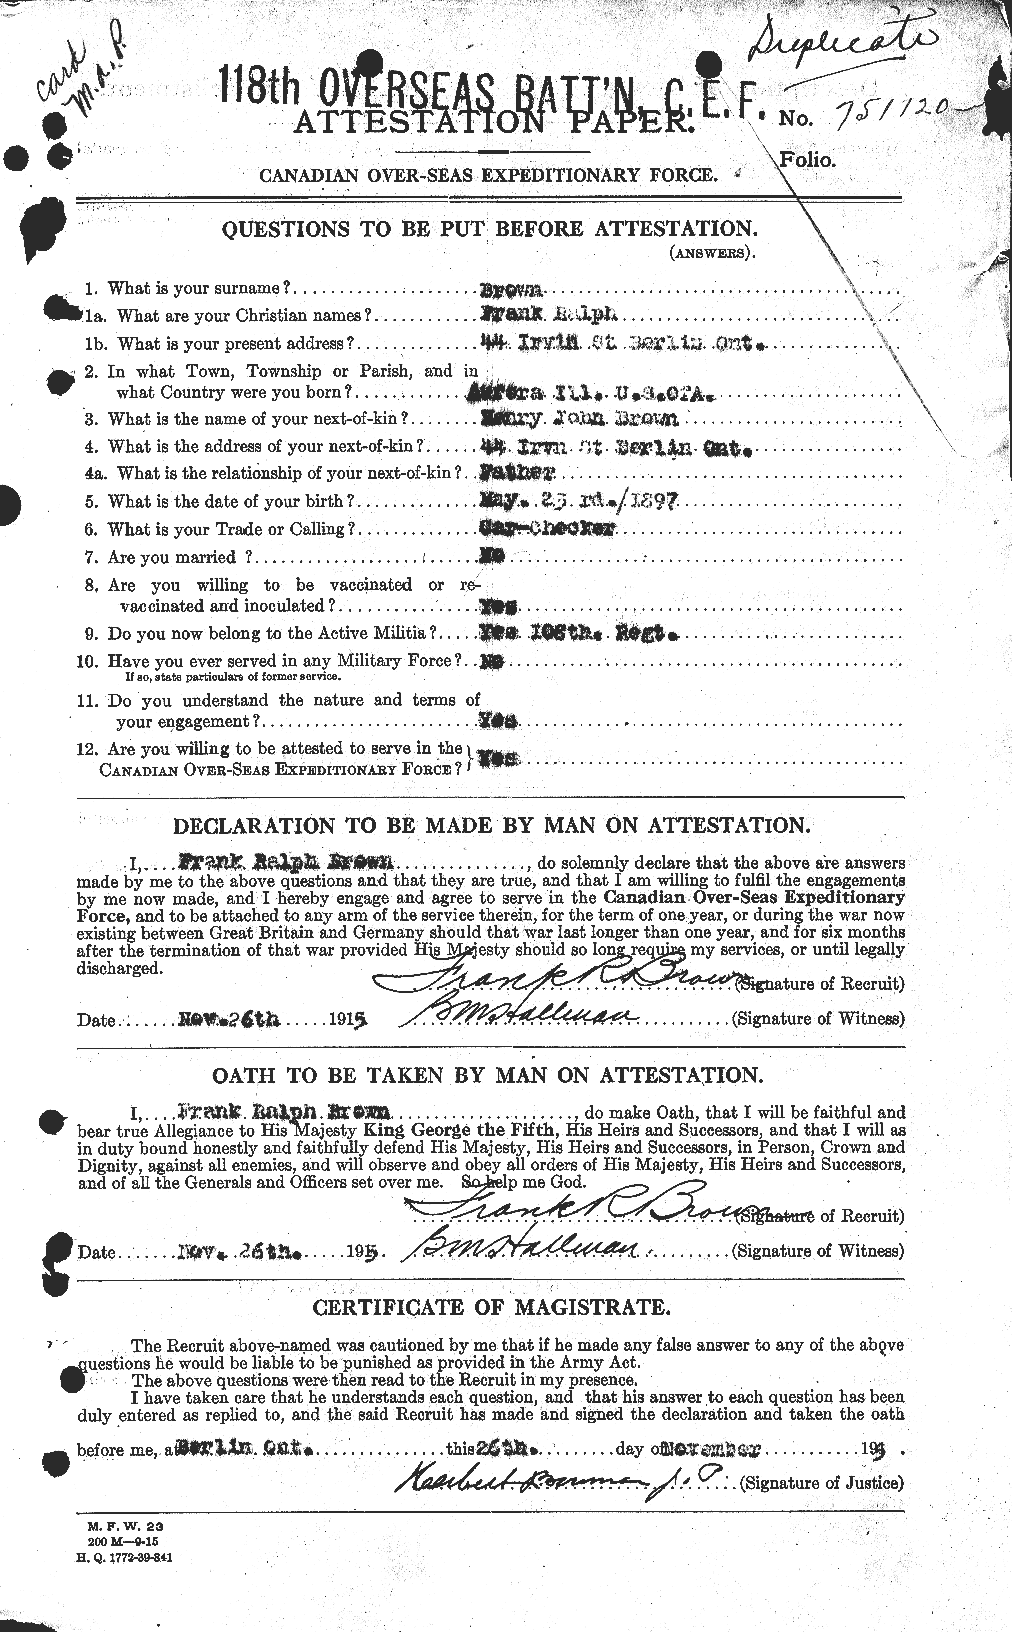 Personnel Records of the First World War - CEF 266154a